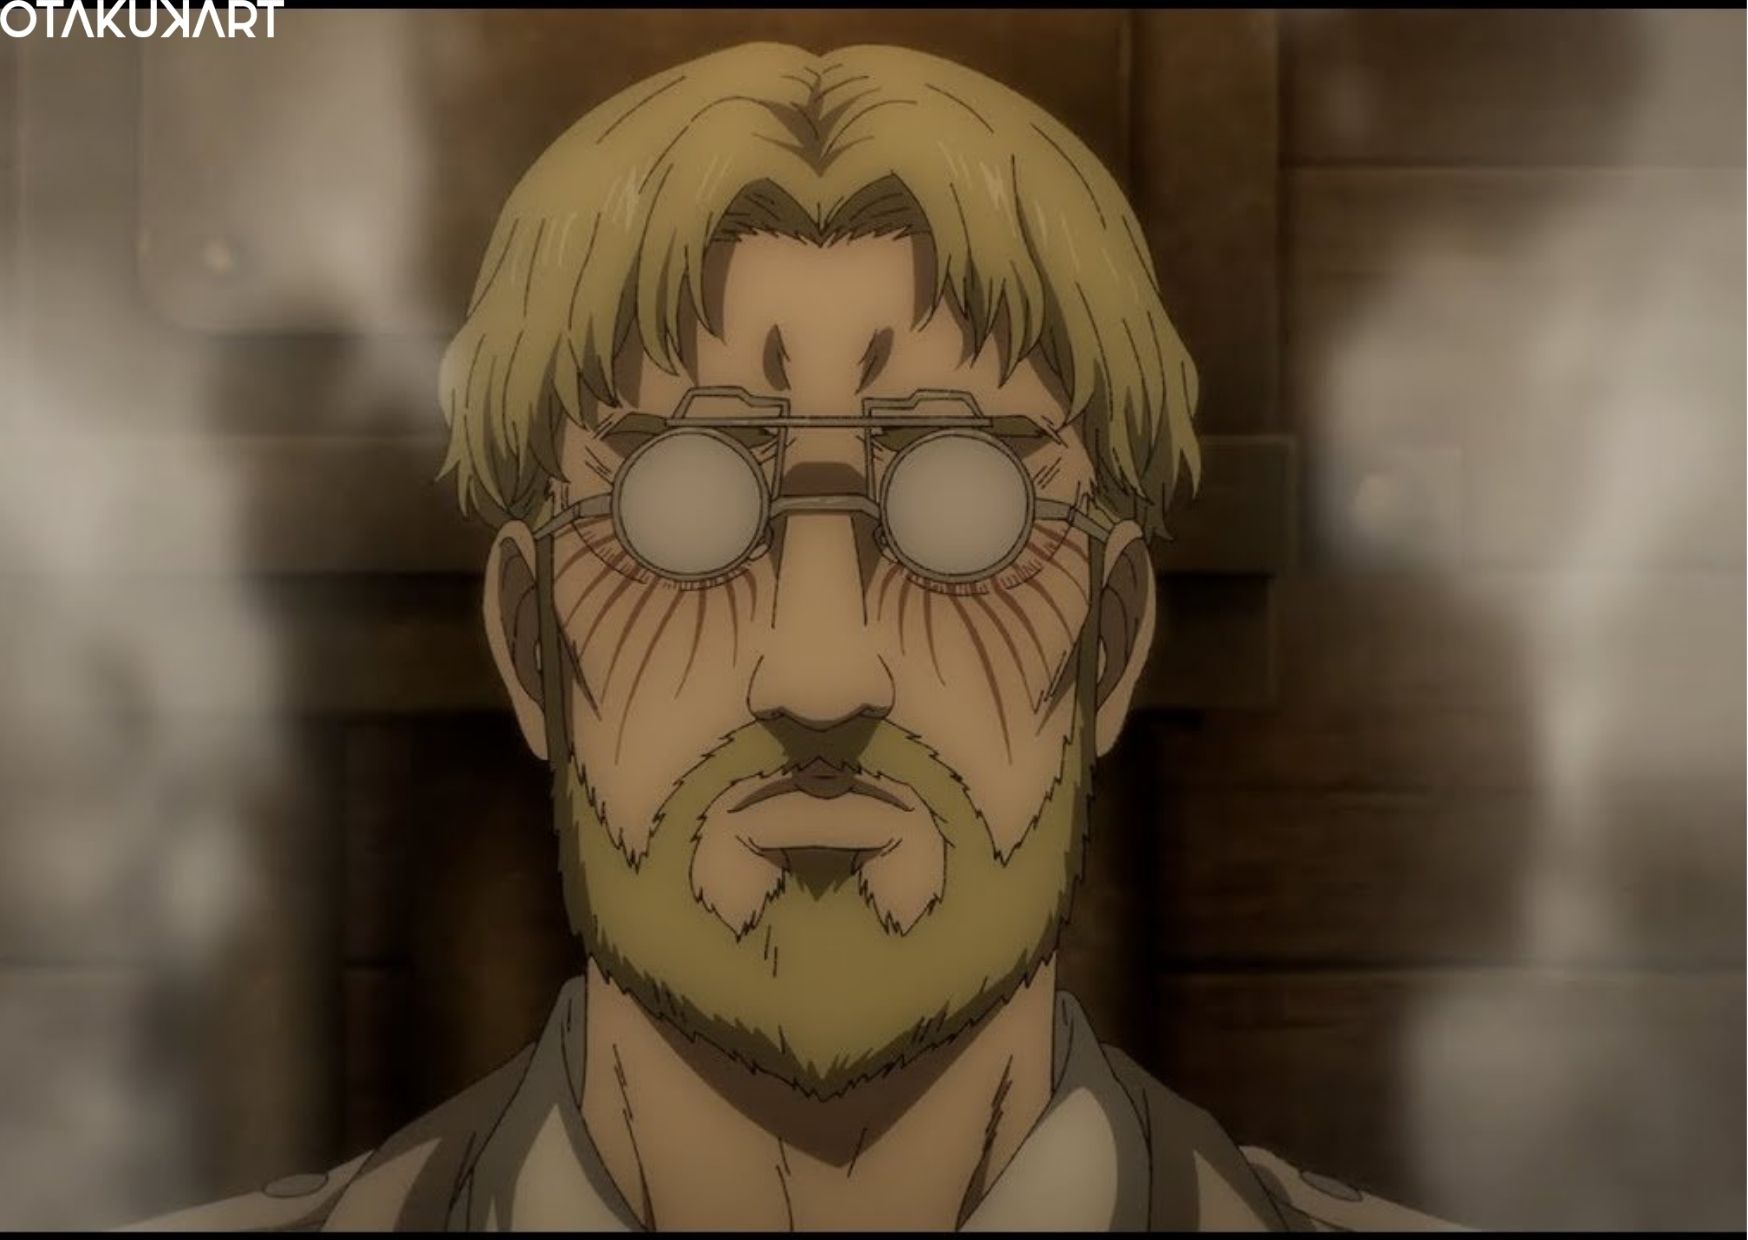 Will Zeke Yeager die in Aot?